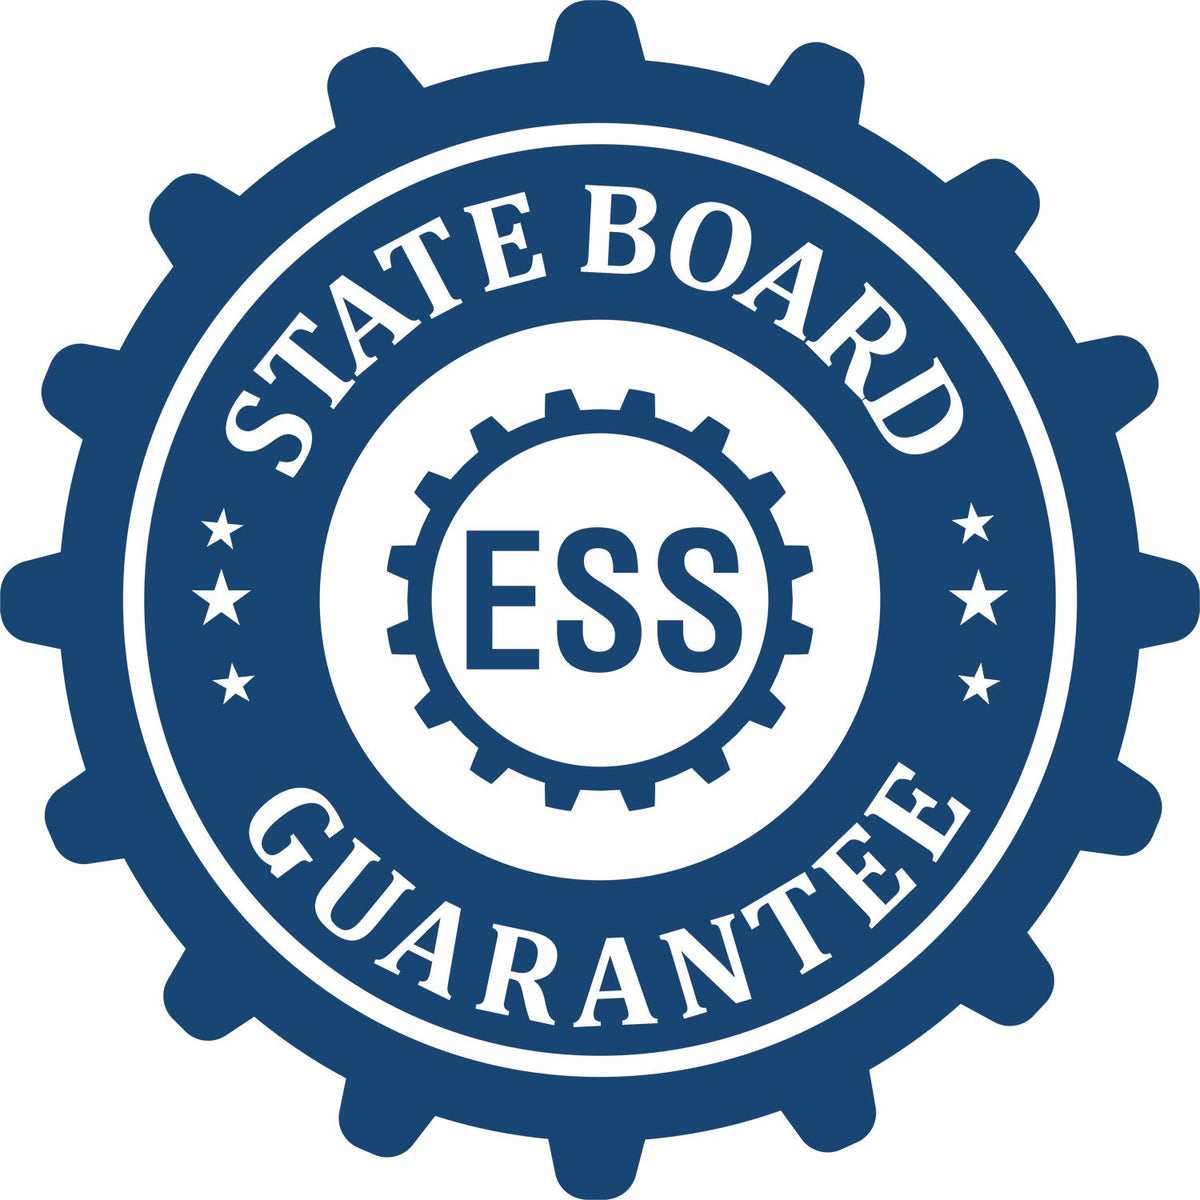 An emblem in a gear shape illustrating a state board guarantee for the Gift Arizona Land Surveyor Seal